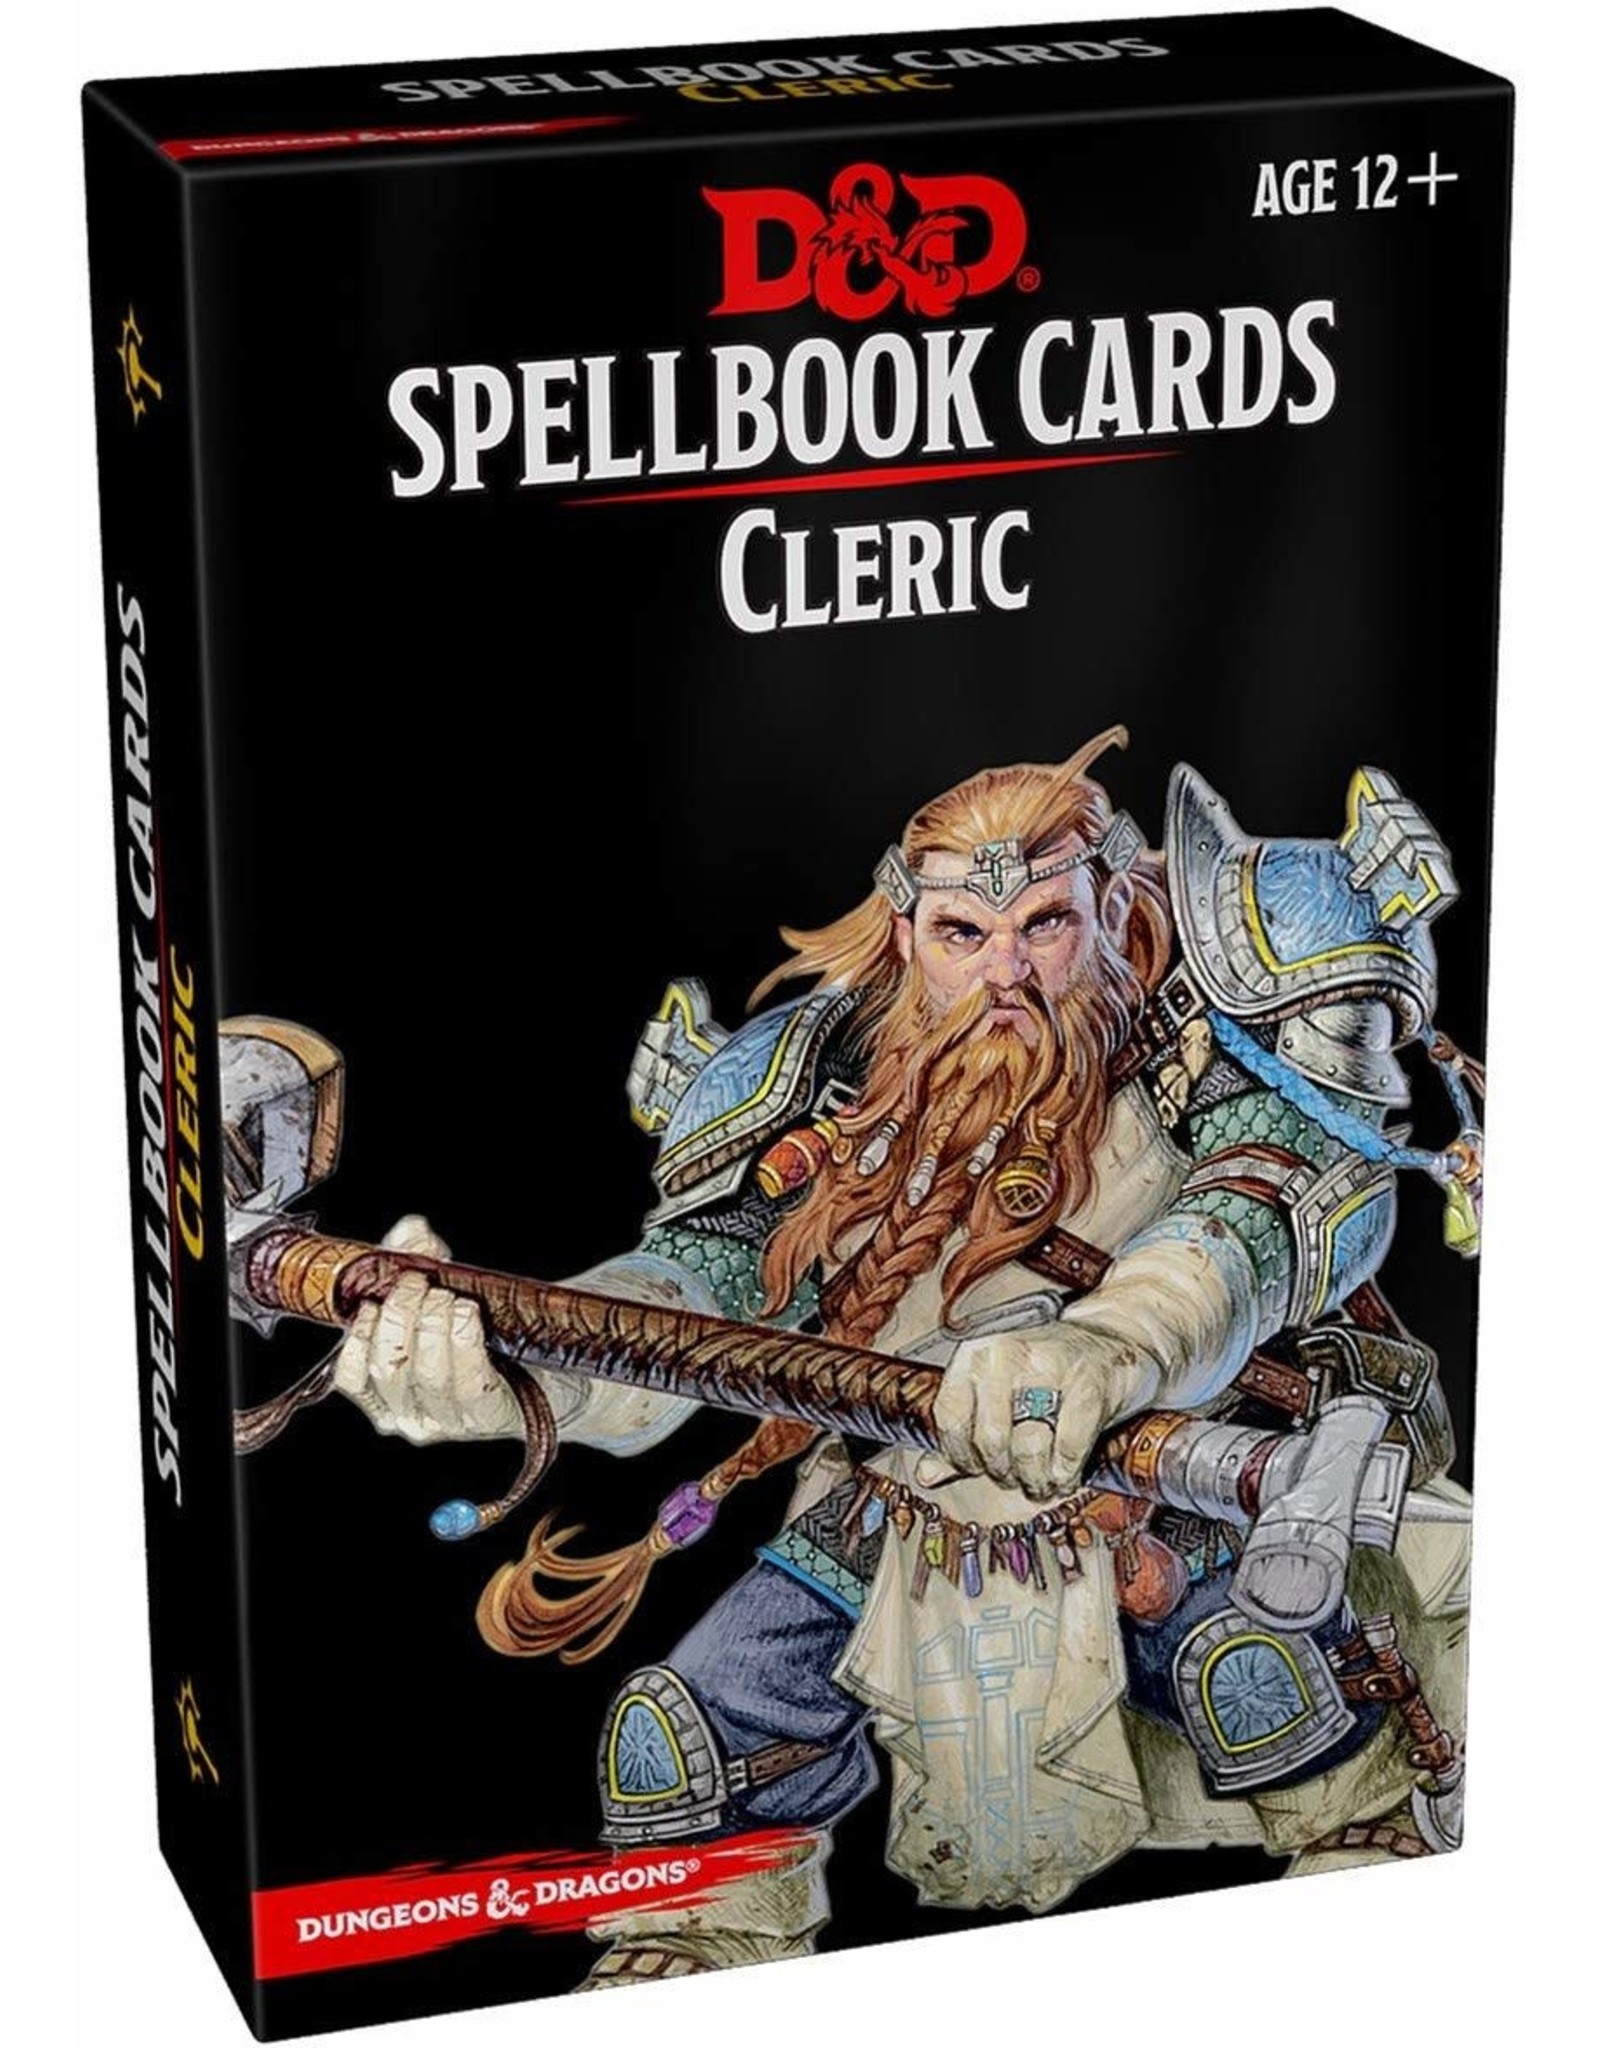 Dungeons & Dragons D&D - Spellbook cards - Cleric